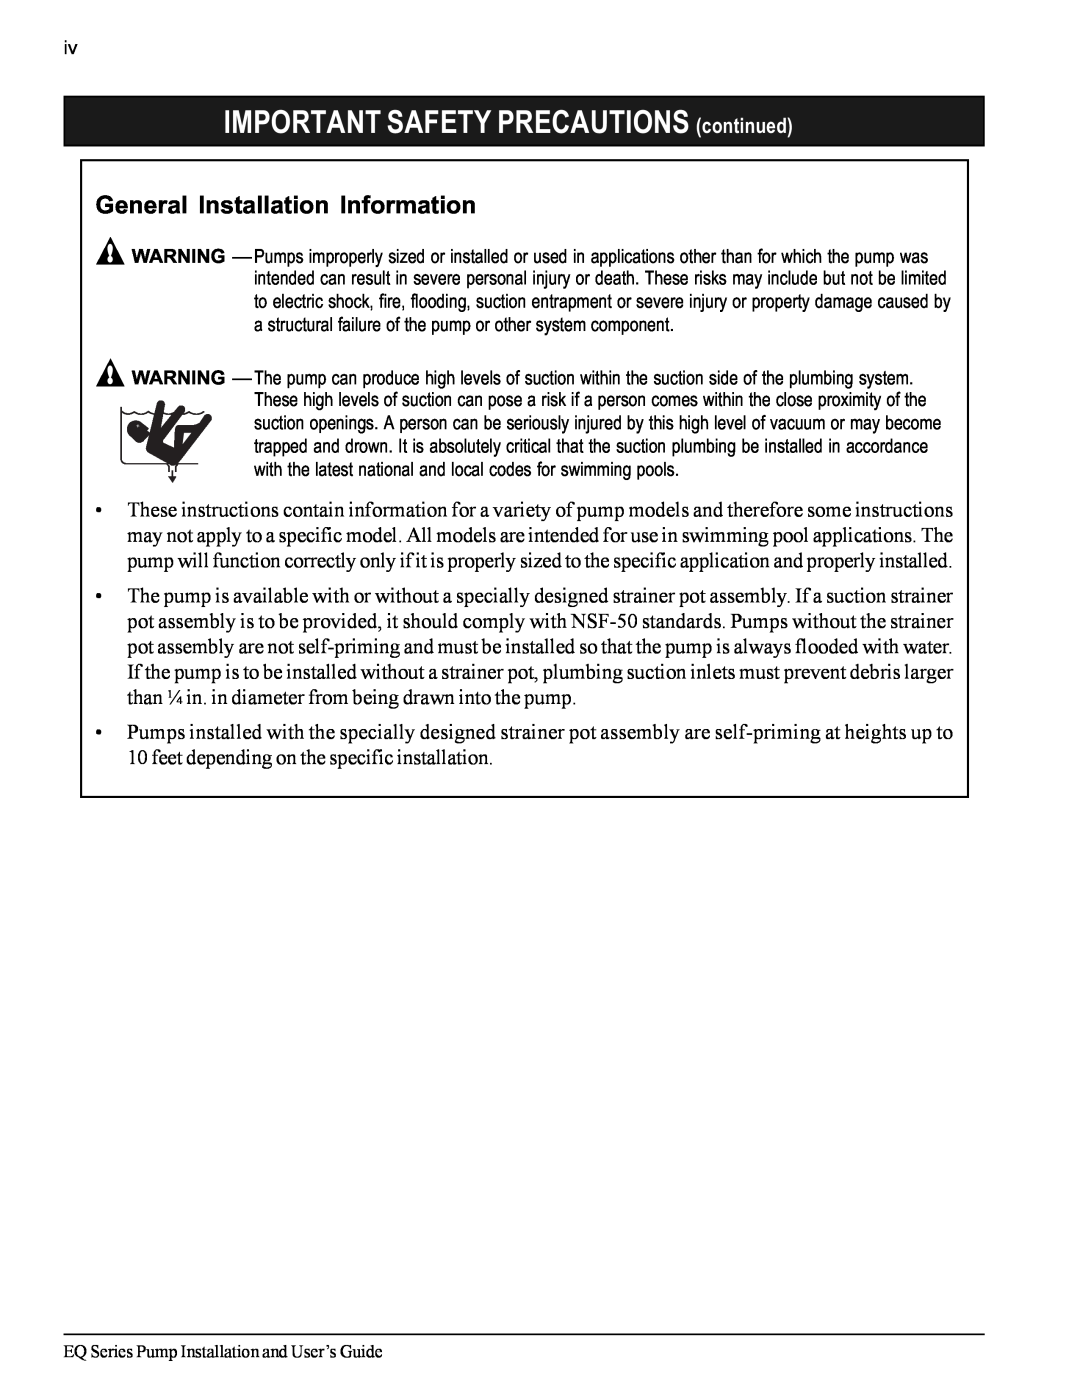 Pentair EQ SERIES important safety instructions General Installation Information, IMPORTANT SAFETY PRECAUTIONS continued 